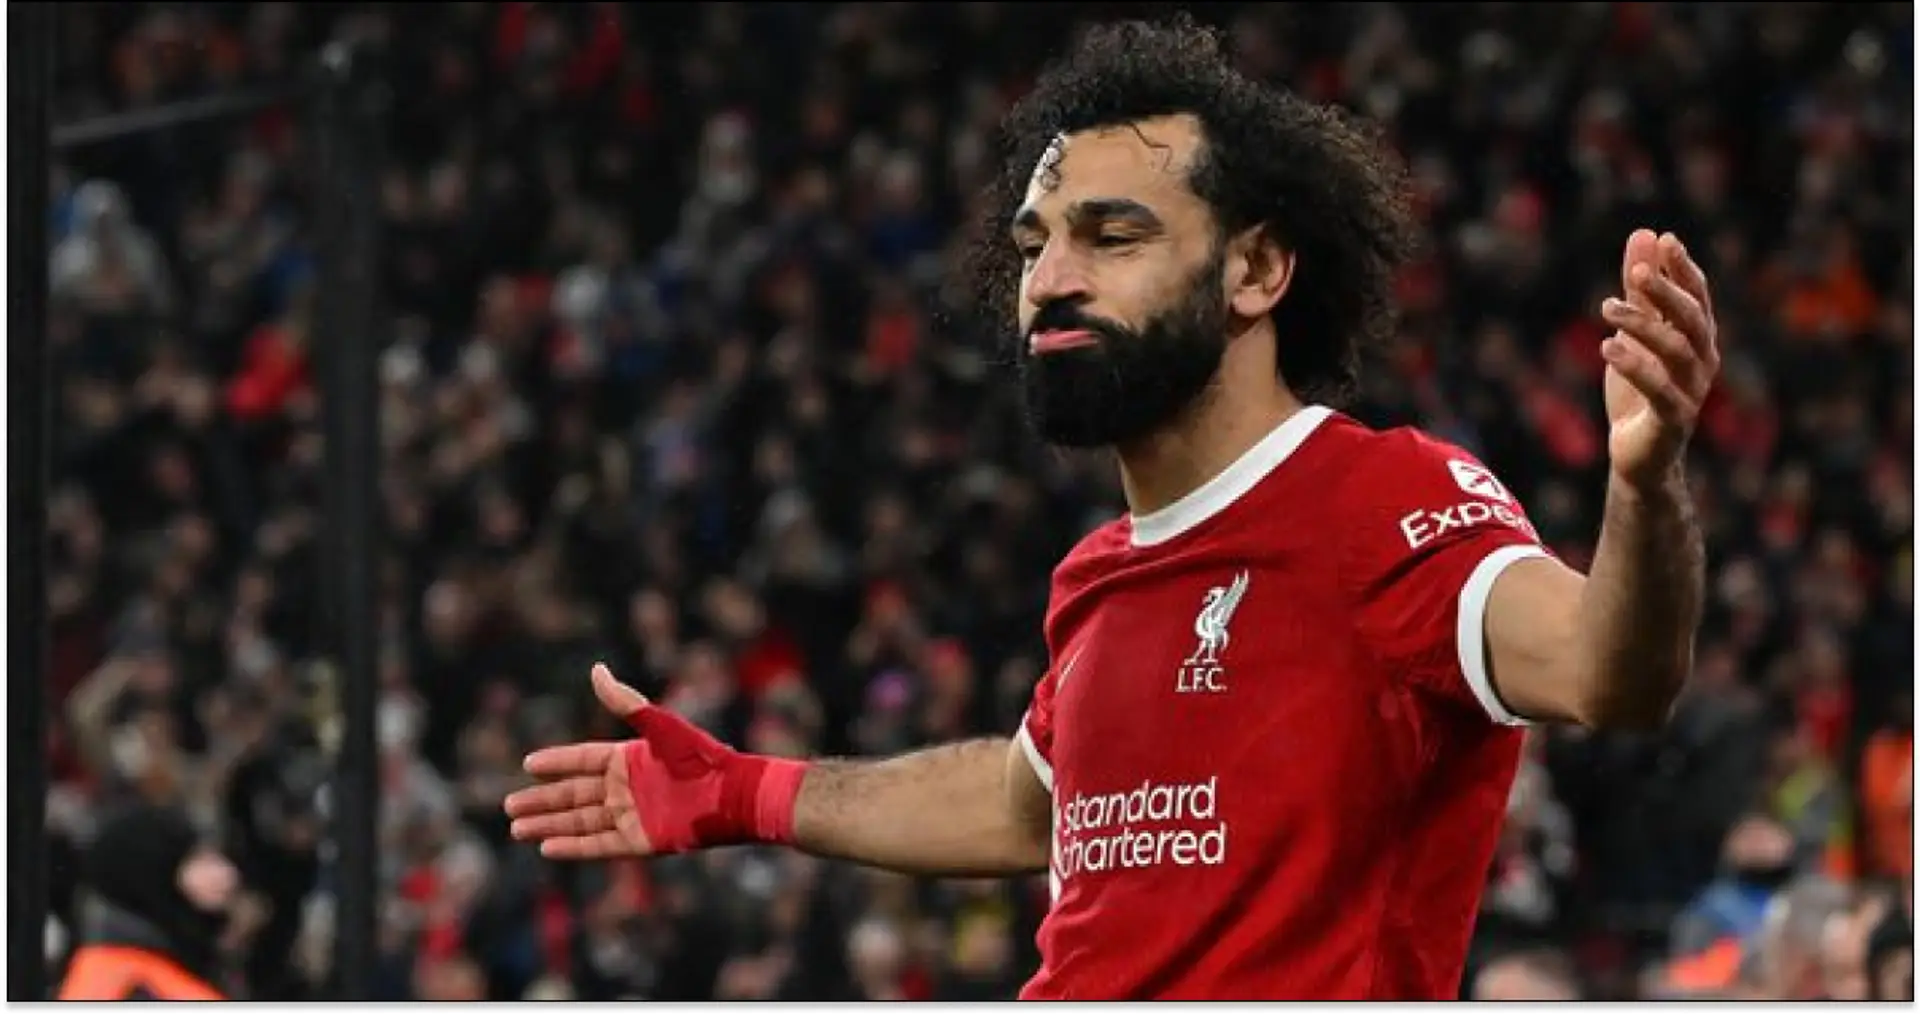 'I didn't want to leave for Afcon with that performance': Salah on Liverpool's half-time transformation v Newcastle